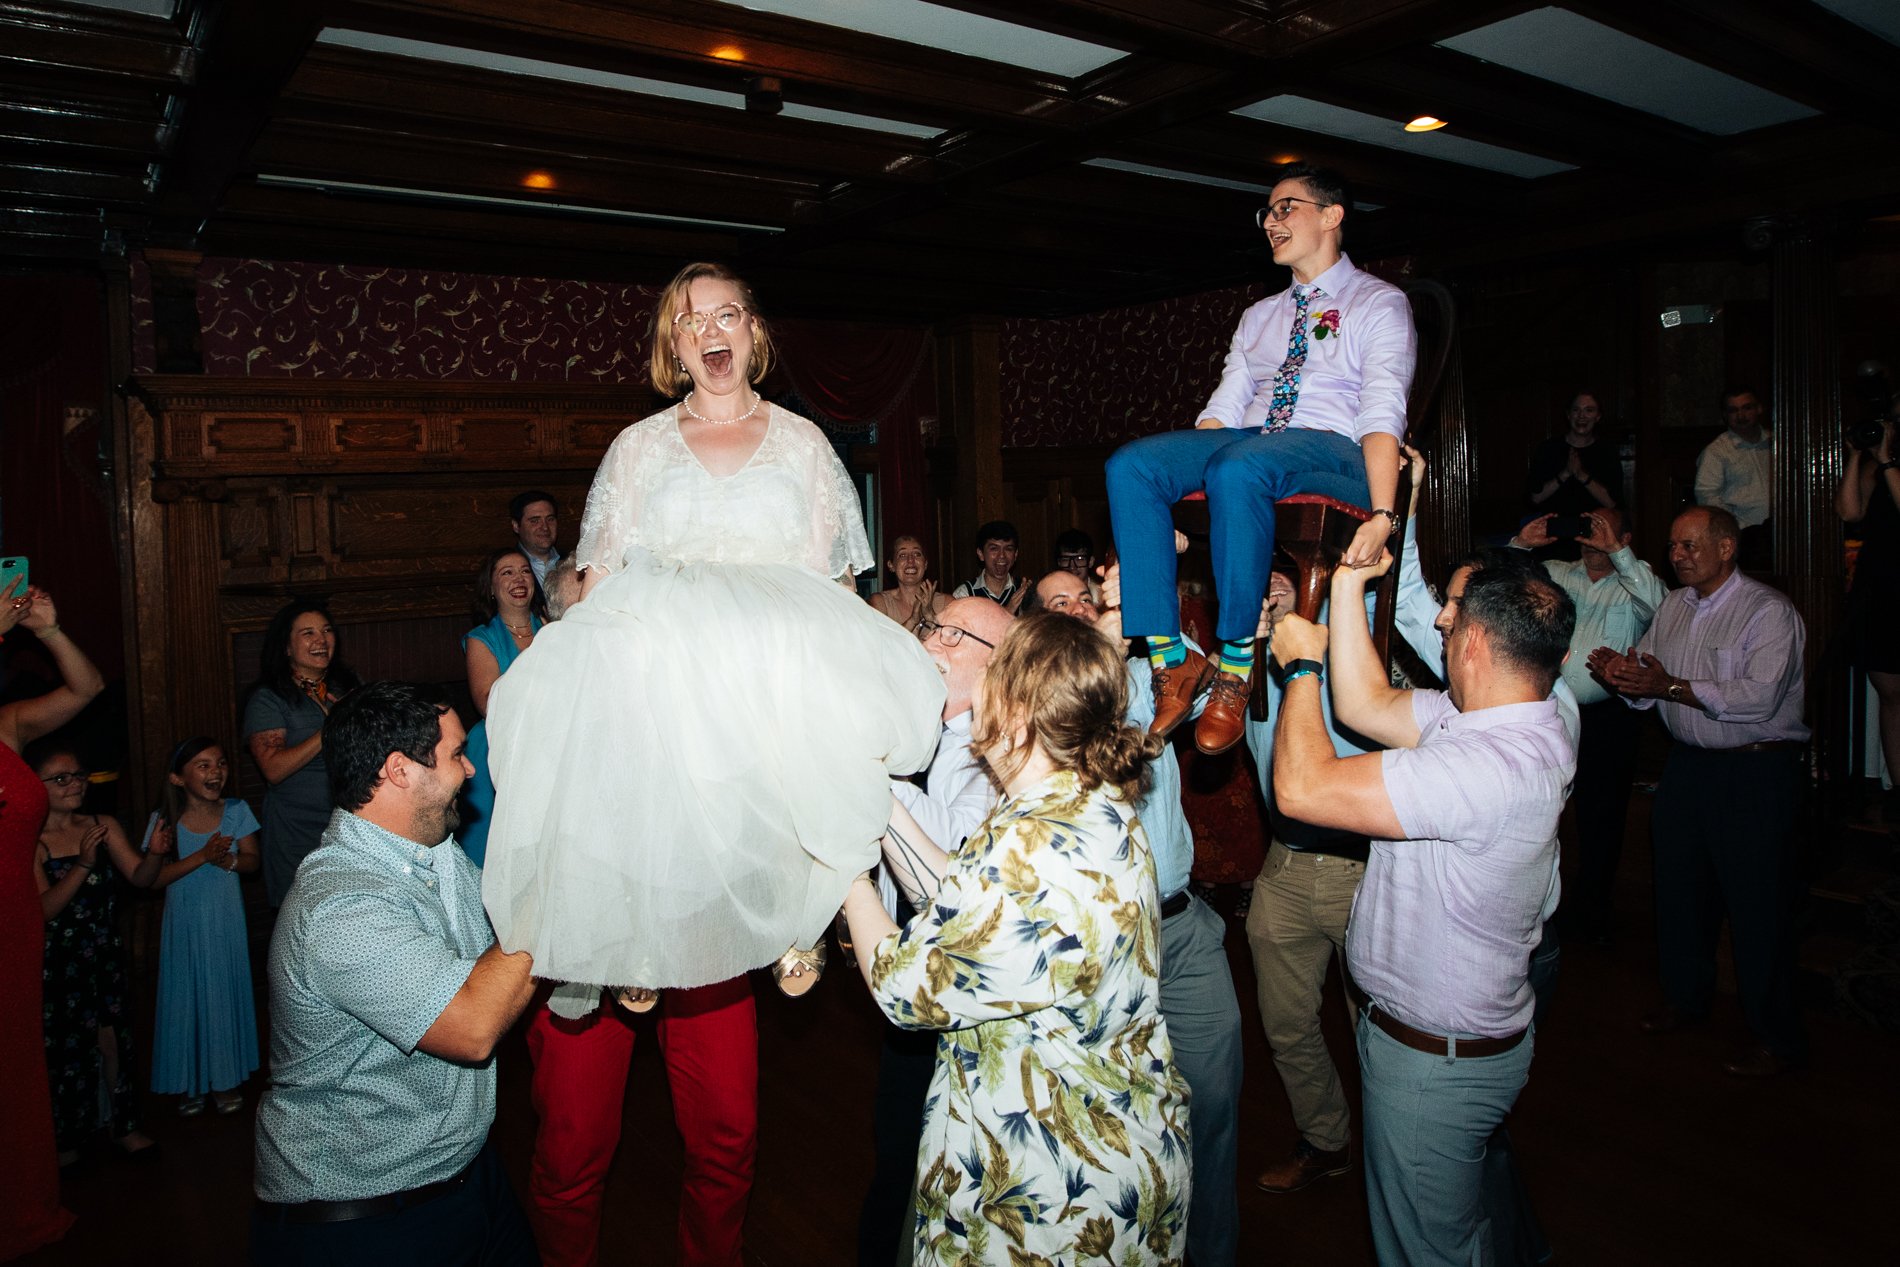  queer and nonbinary wedding couple dancing the hora at Endicott Estate in Massachusetts  